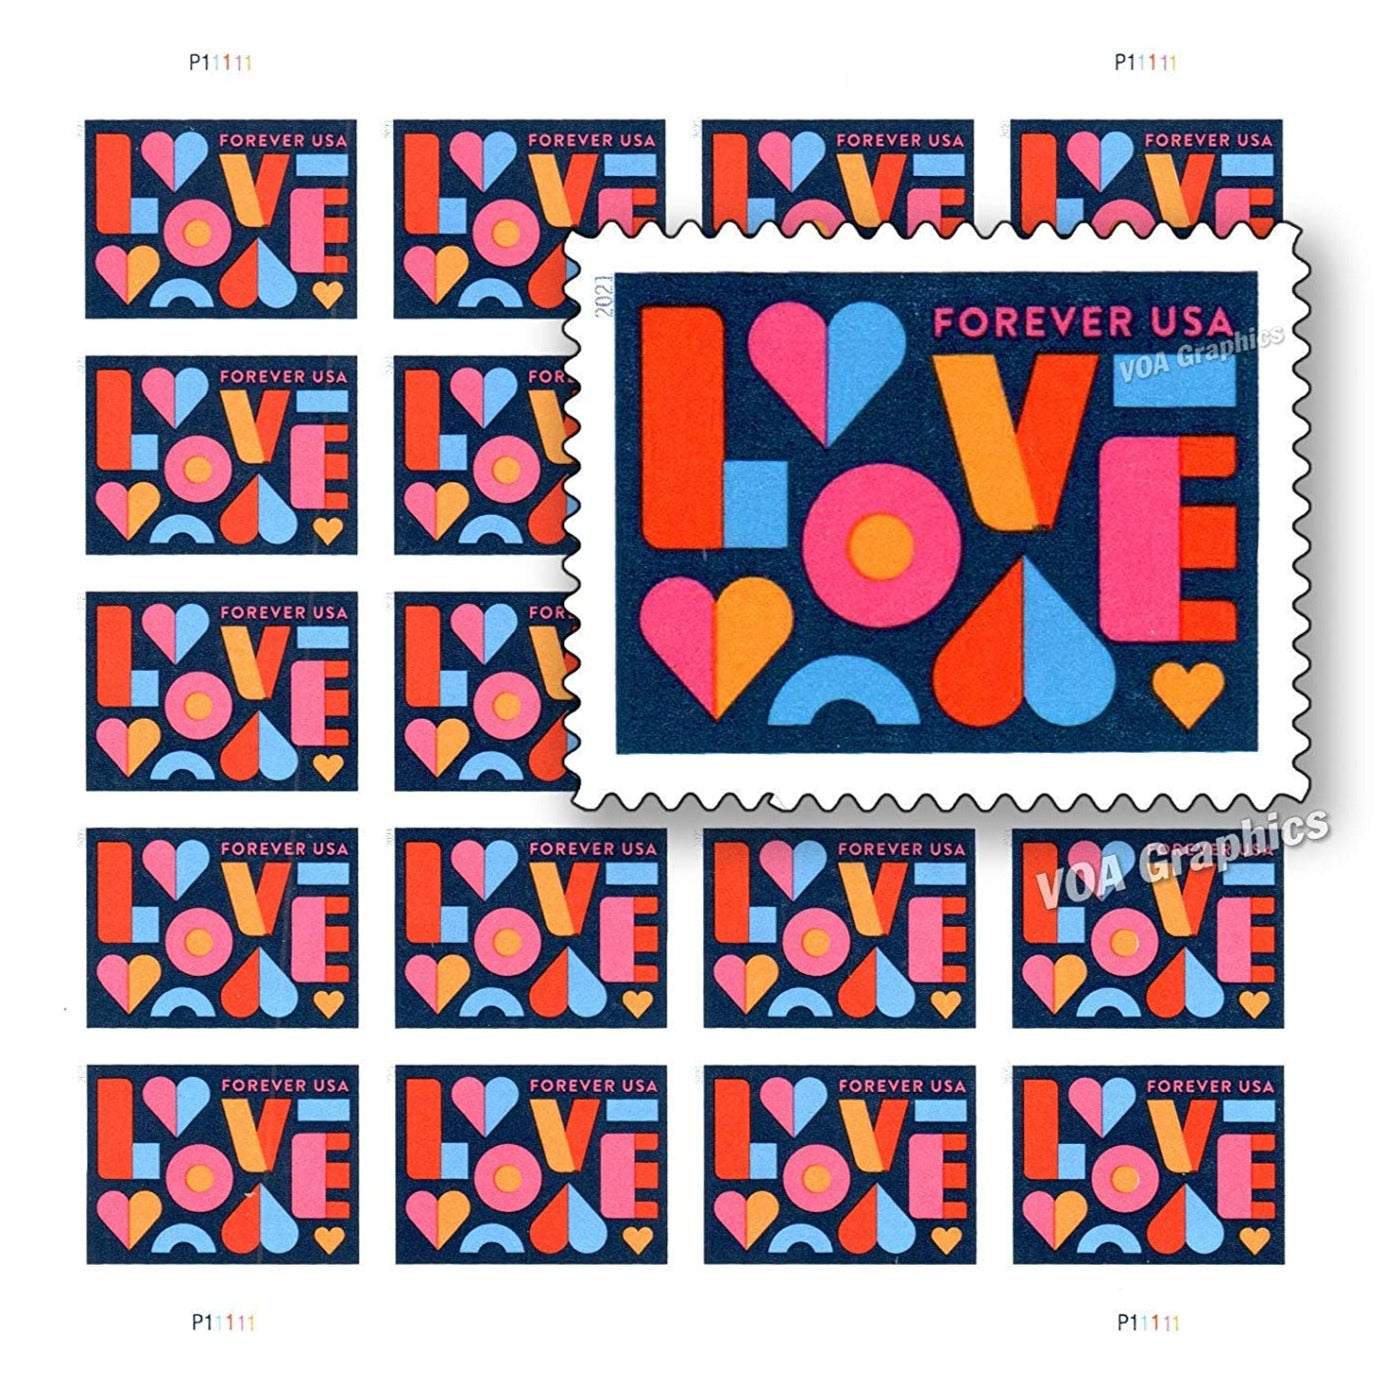 USPS LOVE 2021 Forever Stamps - Sheet of 20 Postage Stamps